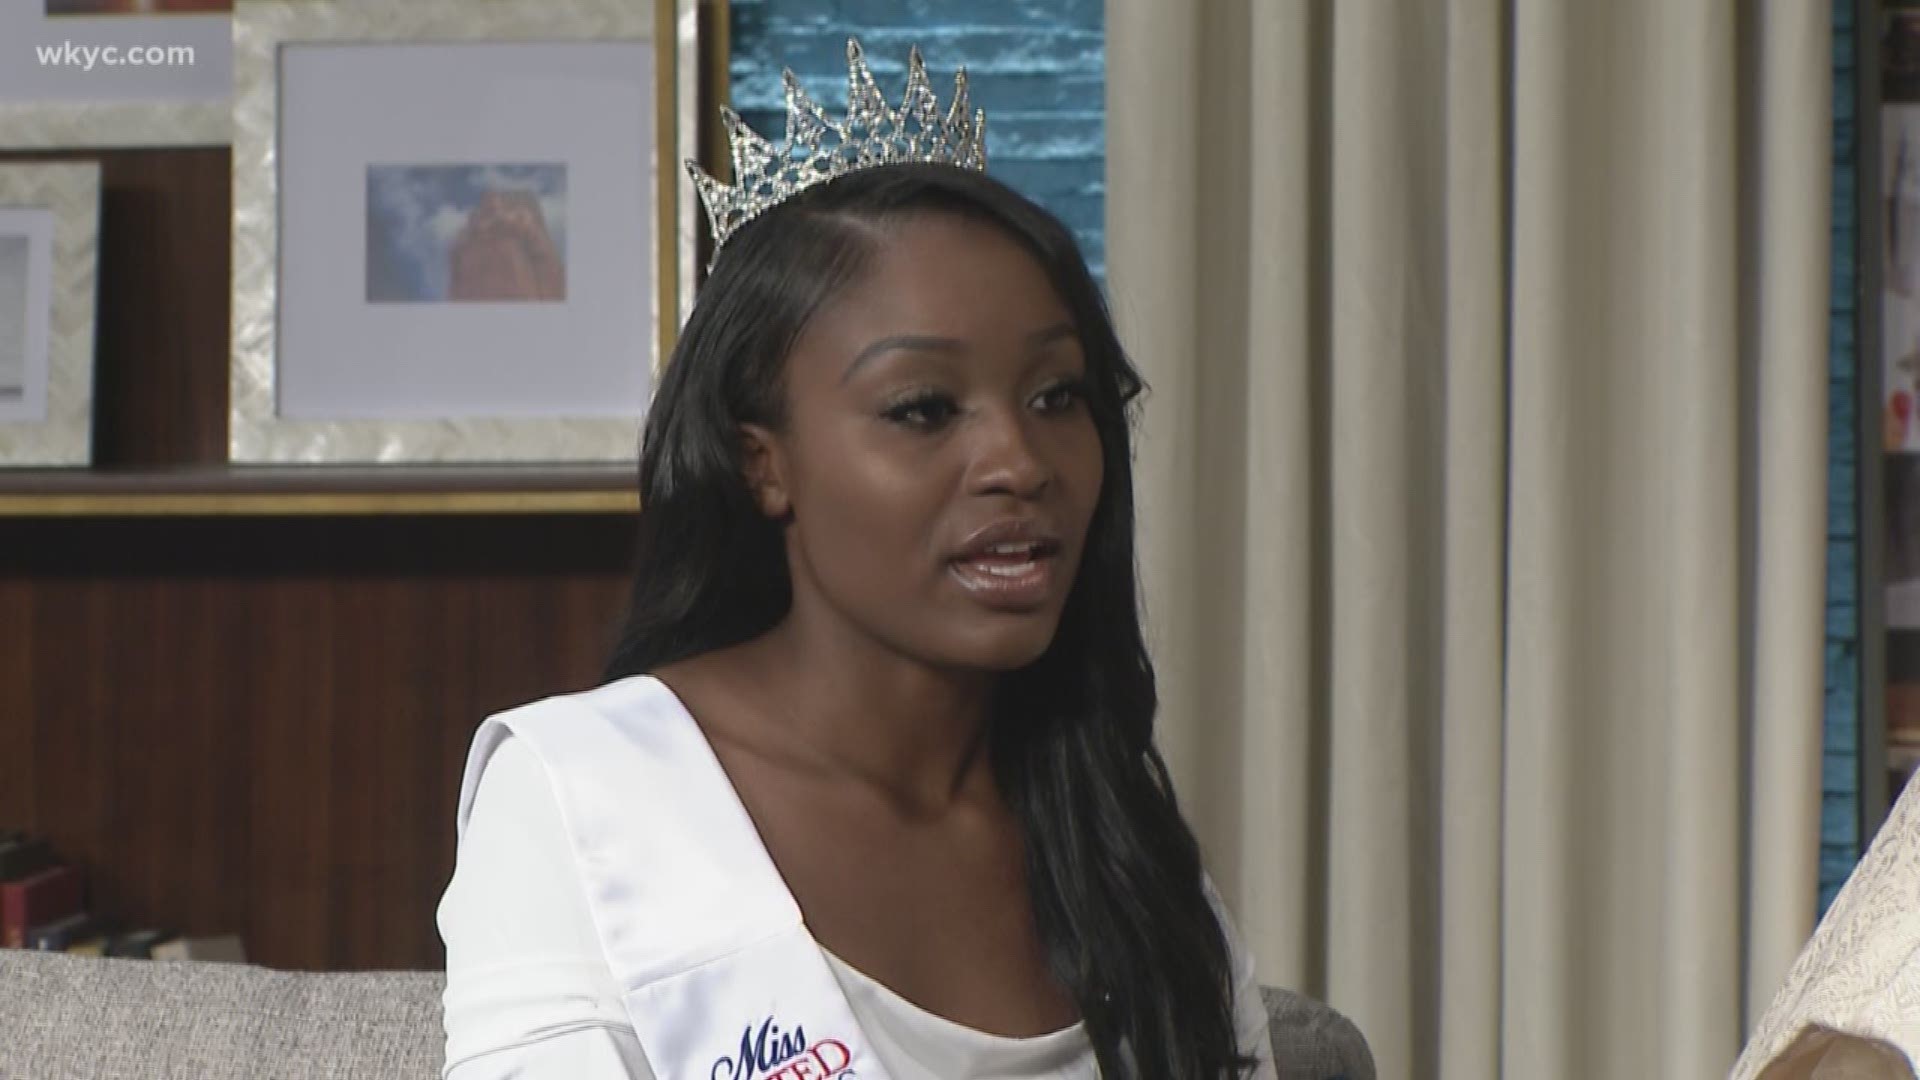 Miss Akron,Urban League 
are helping students attend prom